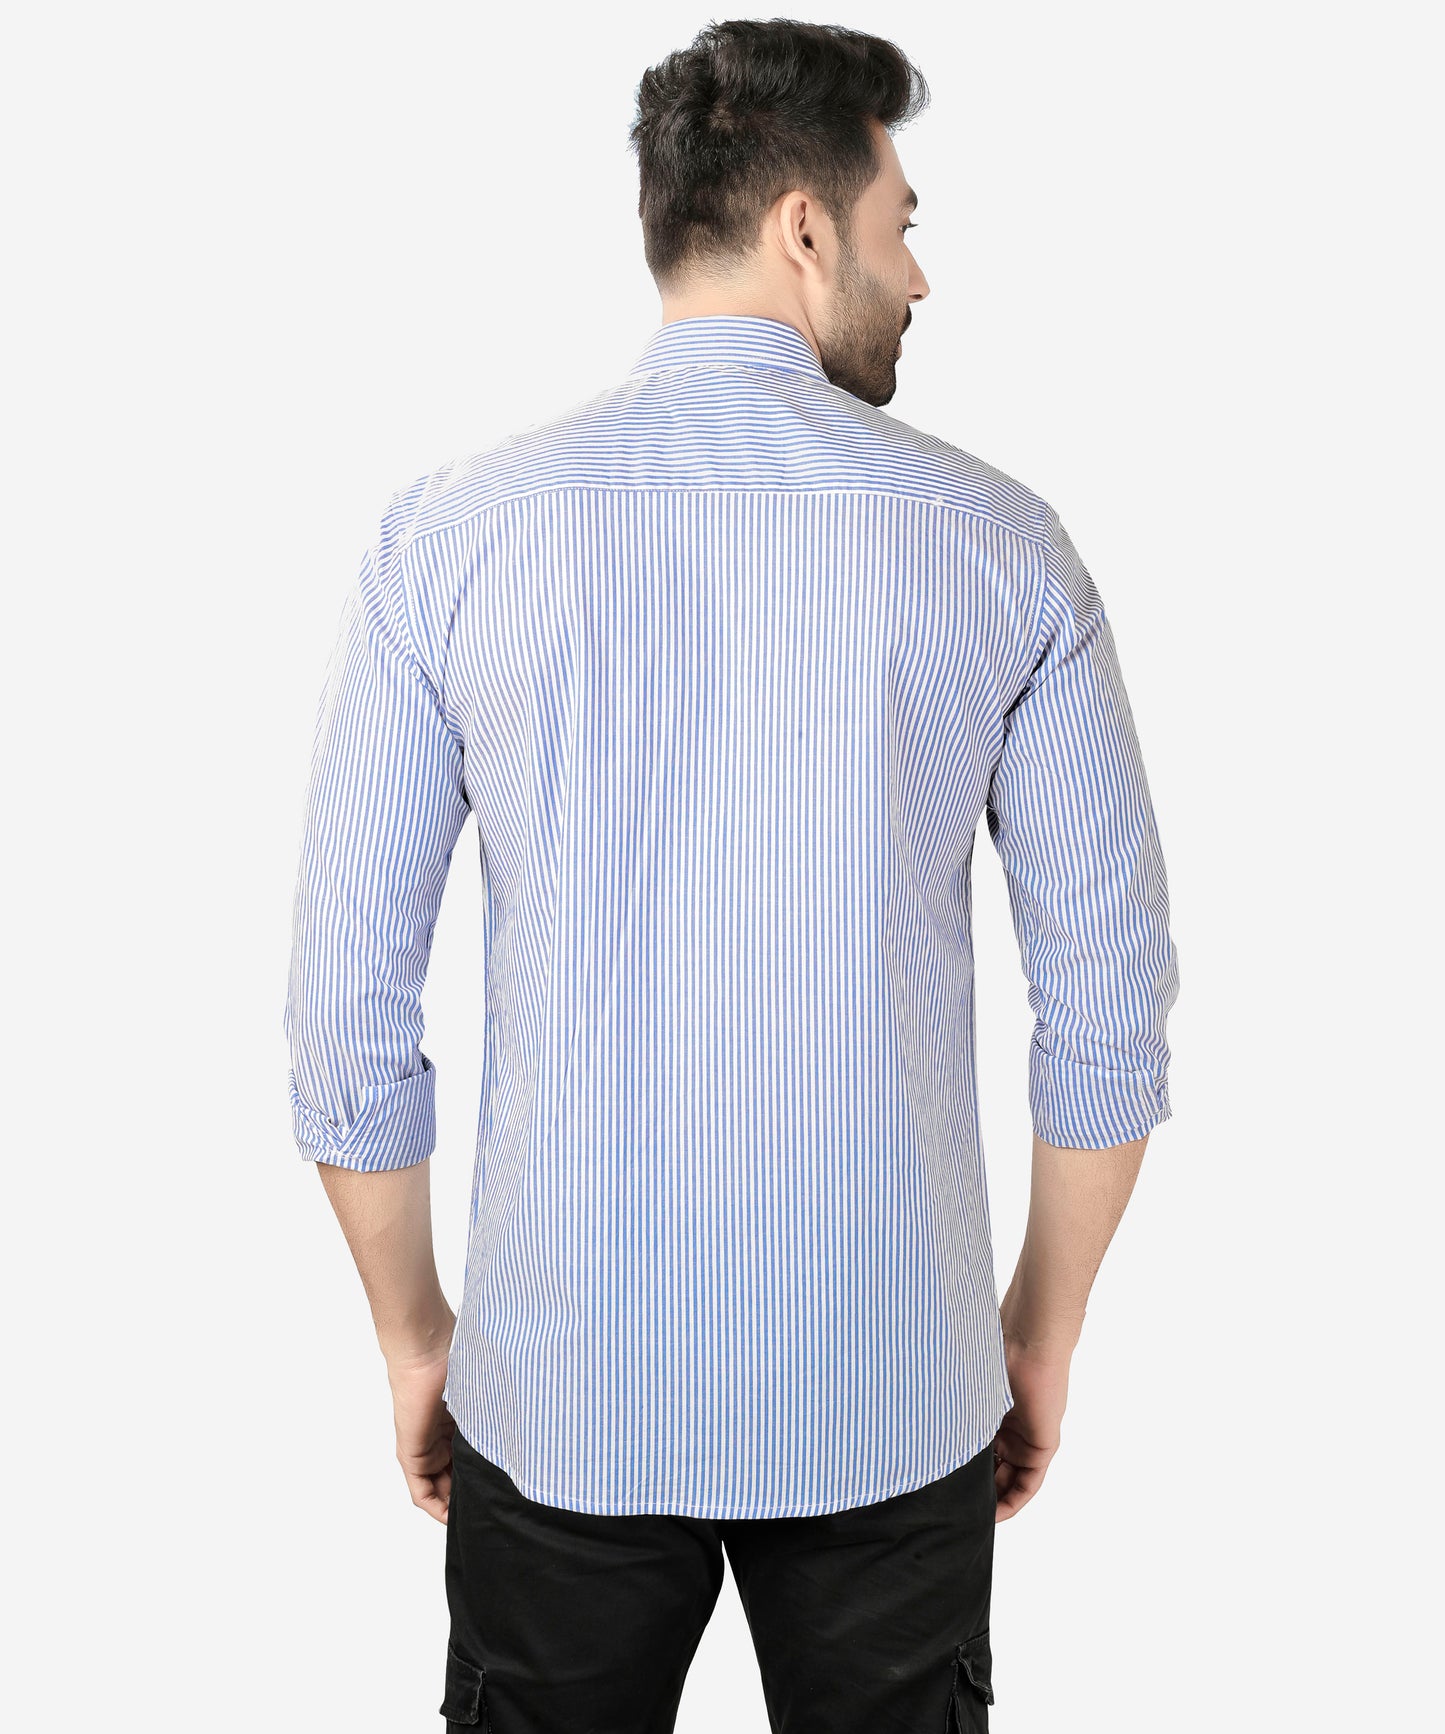 5thanfold Men's Casual Pure Cotton Full Sleeve Striped Sky Blue Slim Fit Shirt